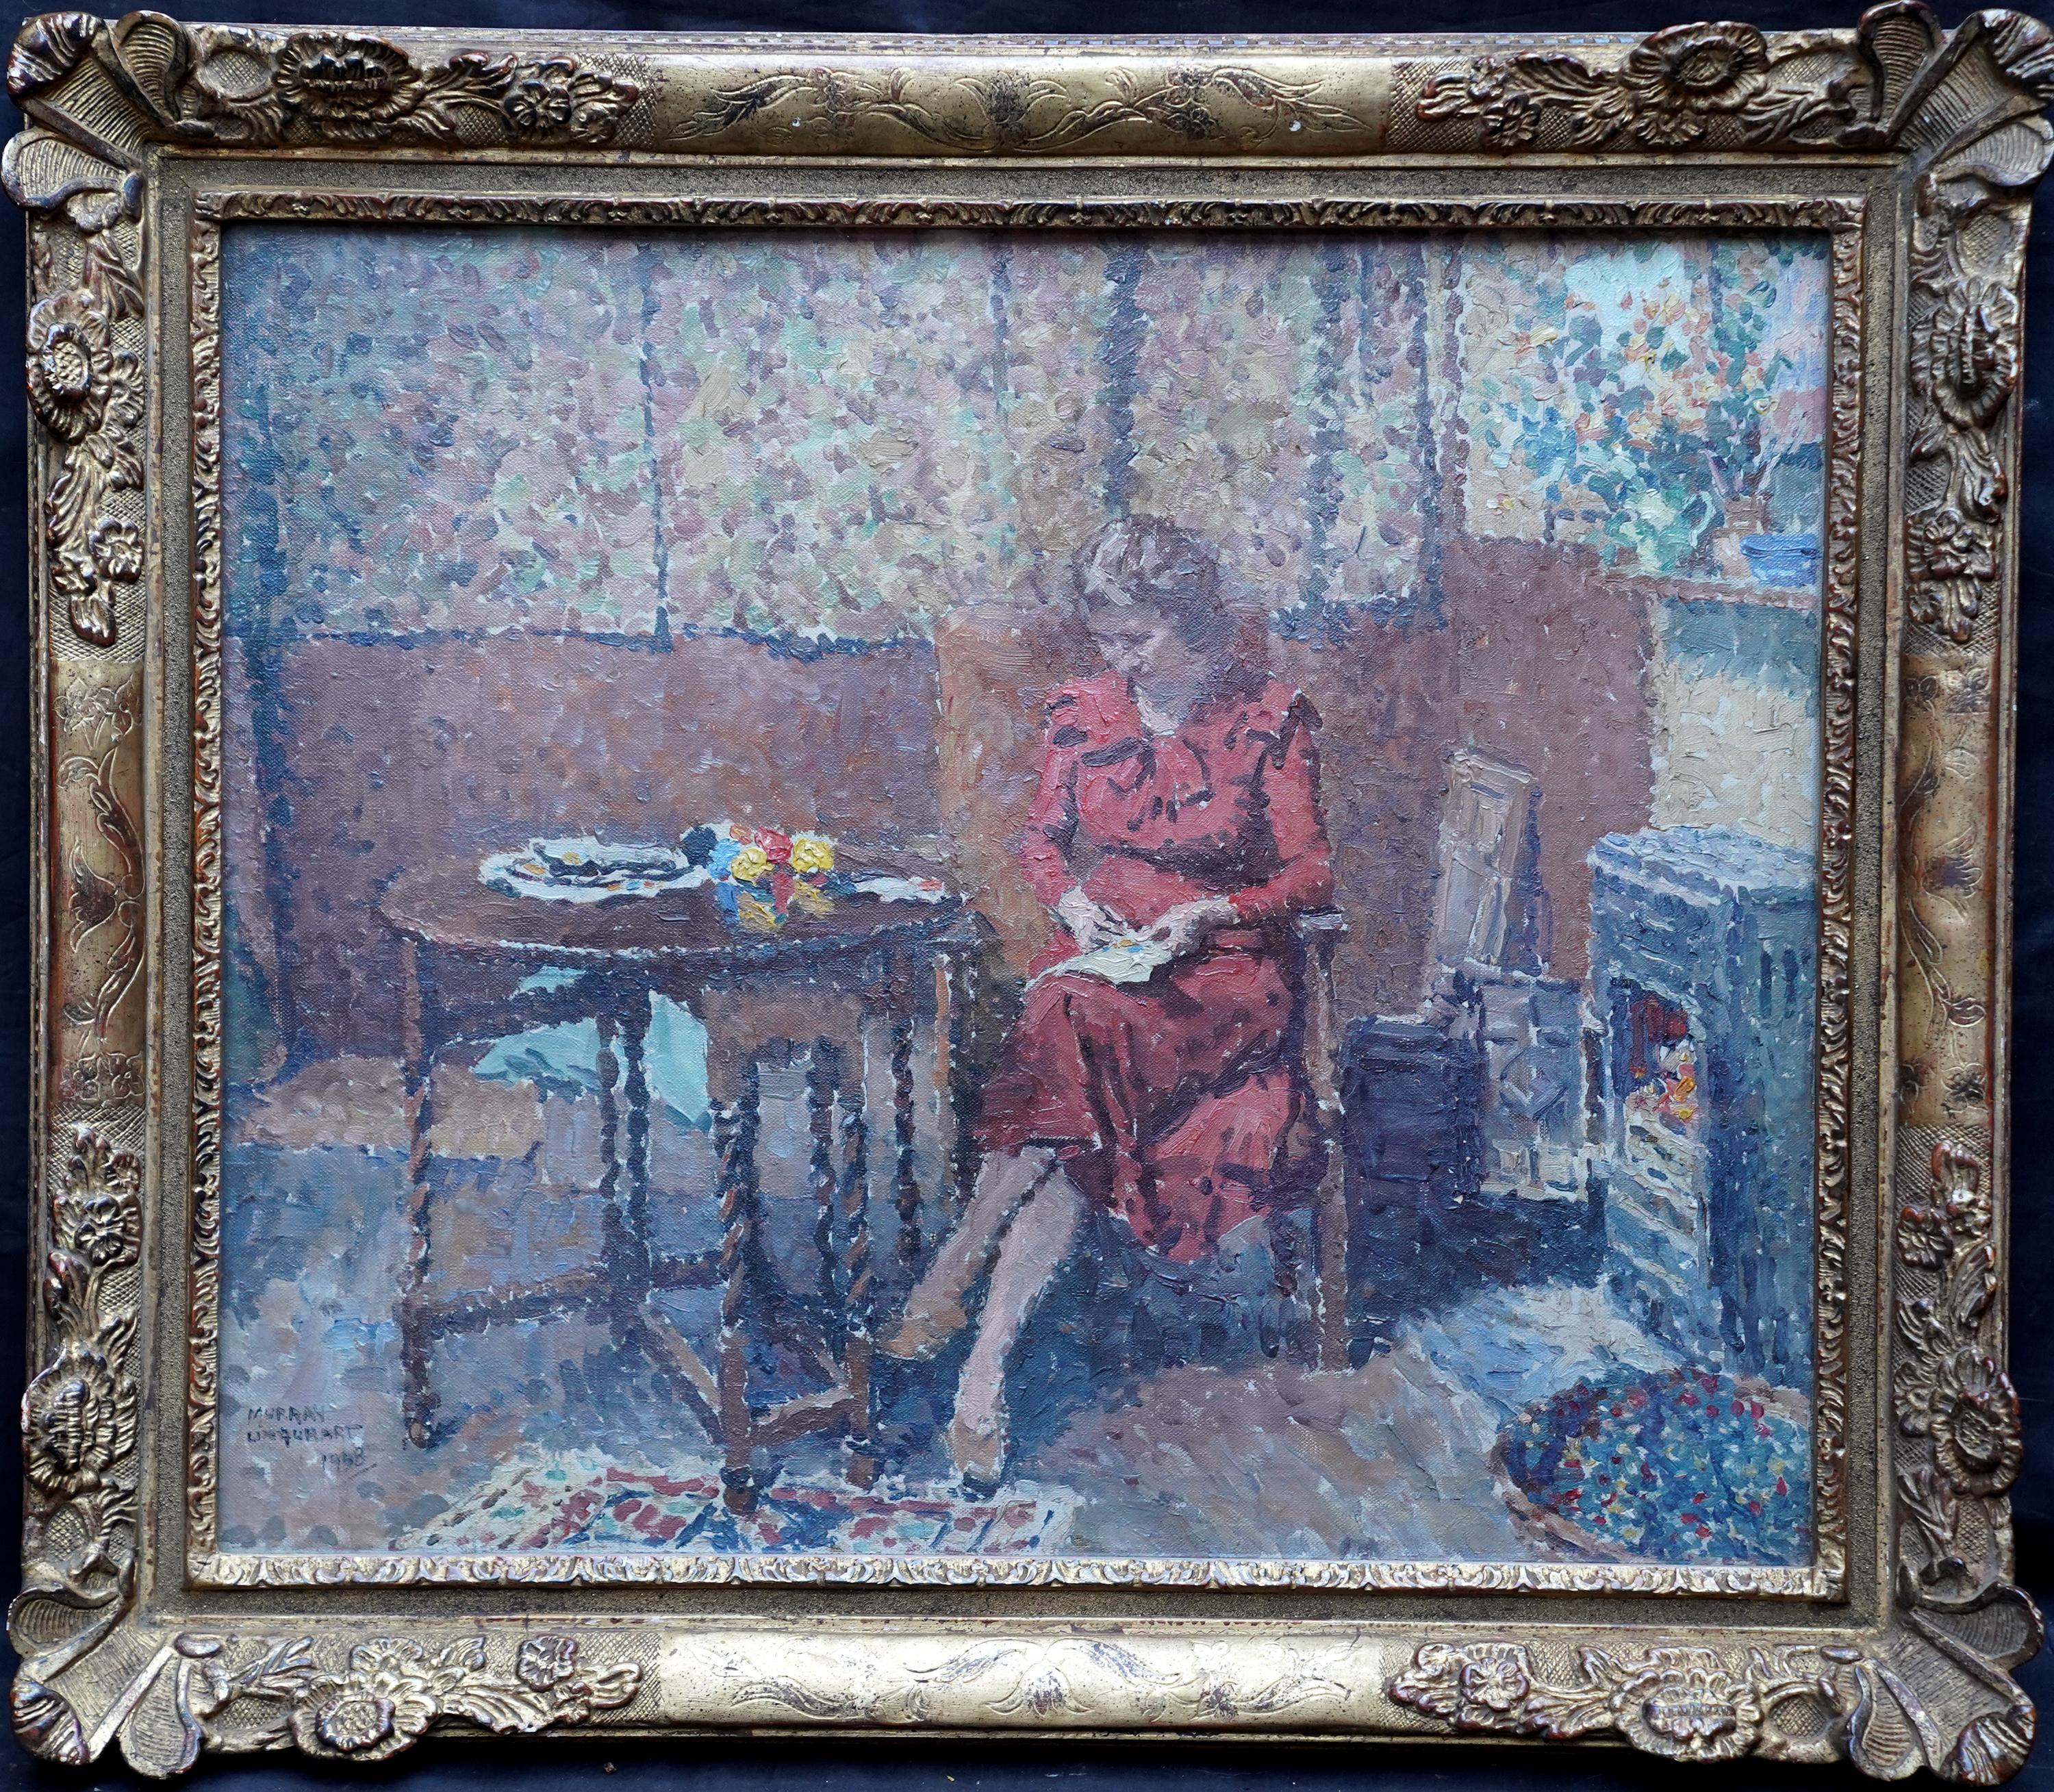 Murray McNeel Caird Urquhart Portrait Painting - Portrait of Lady Sewing in an Interior - Scottish 40s Pointilliste oil painting